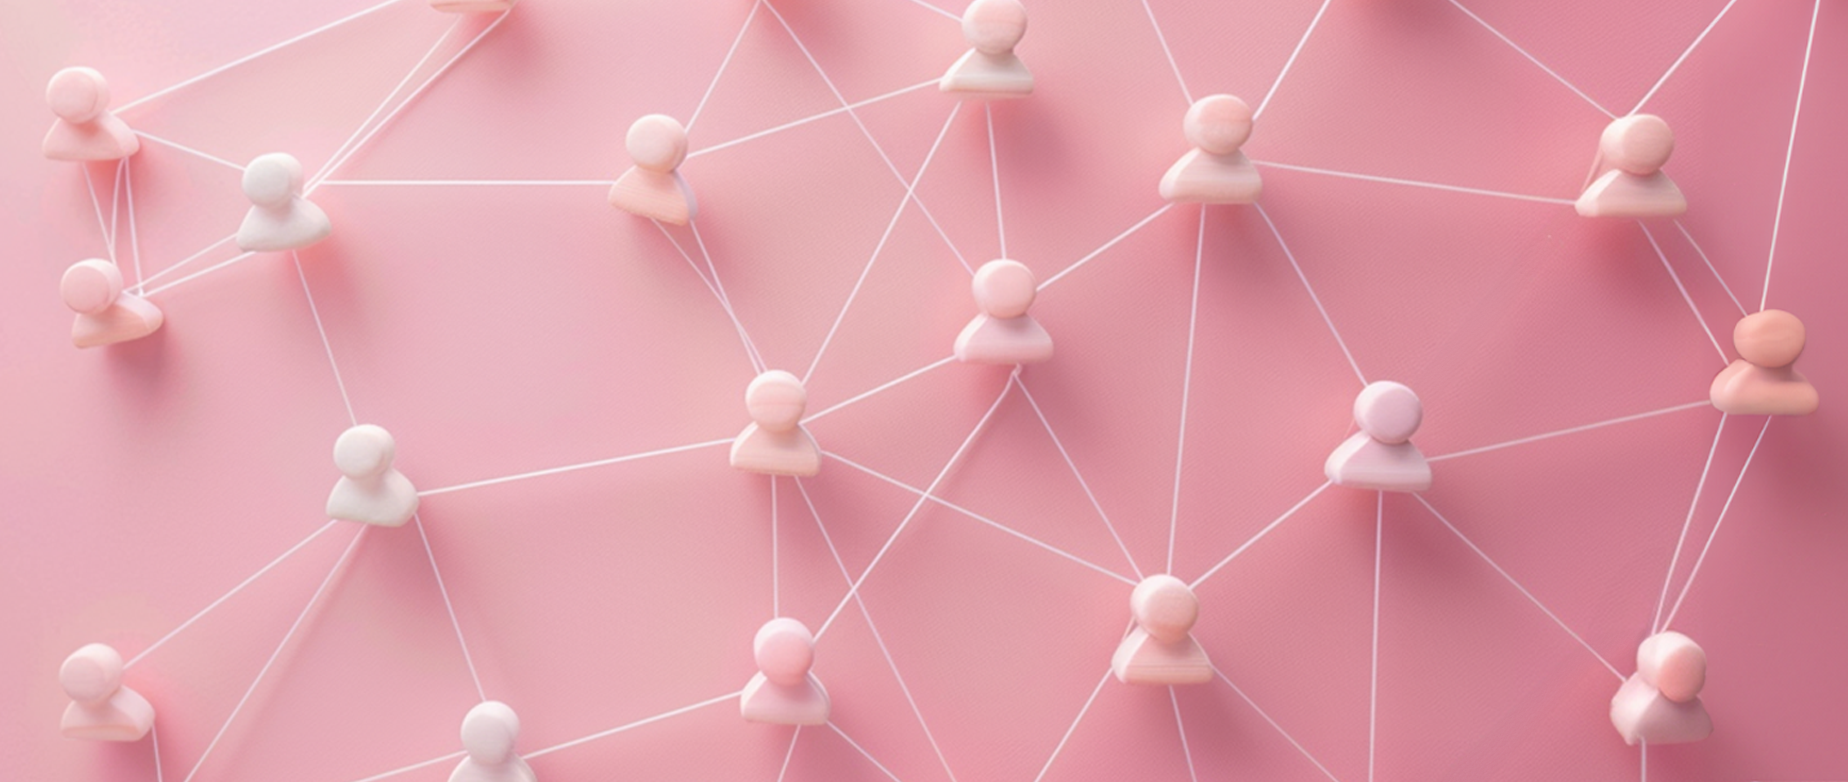 Profile icons connected with pathways on a pink background.